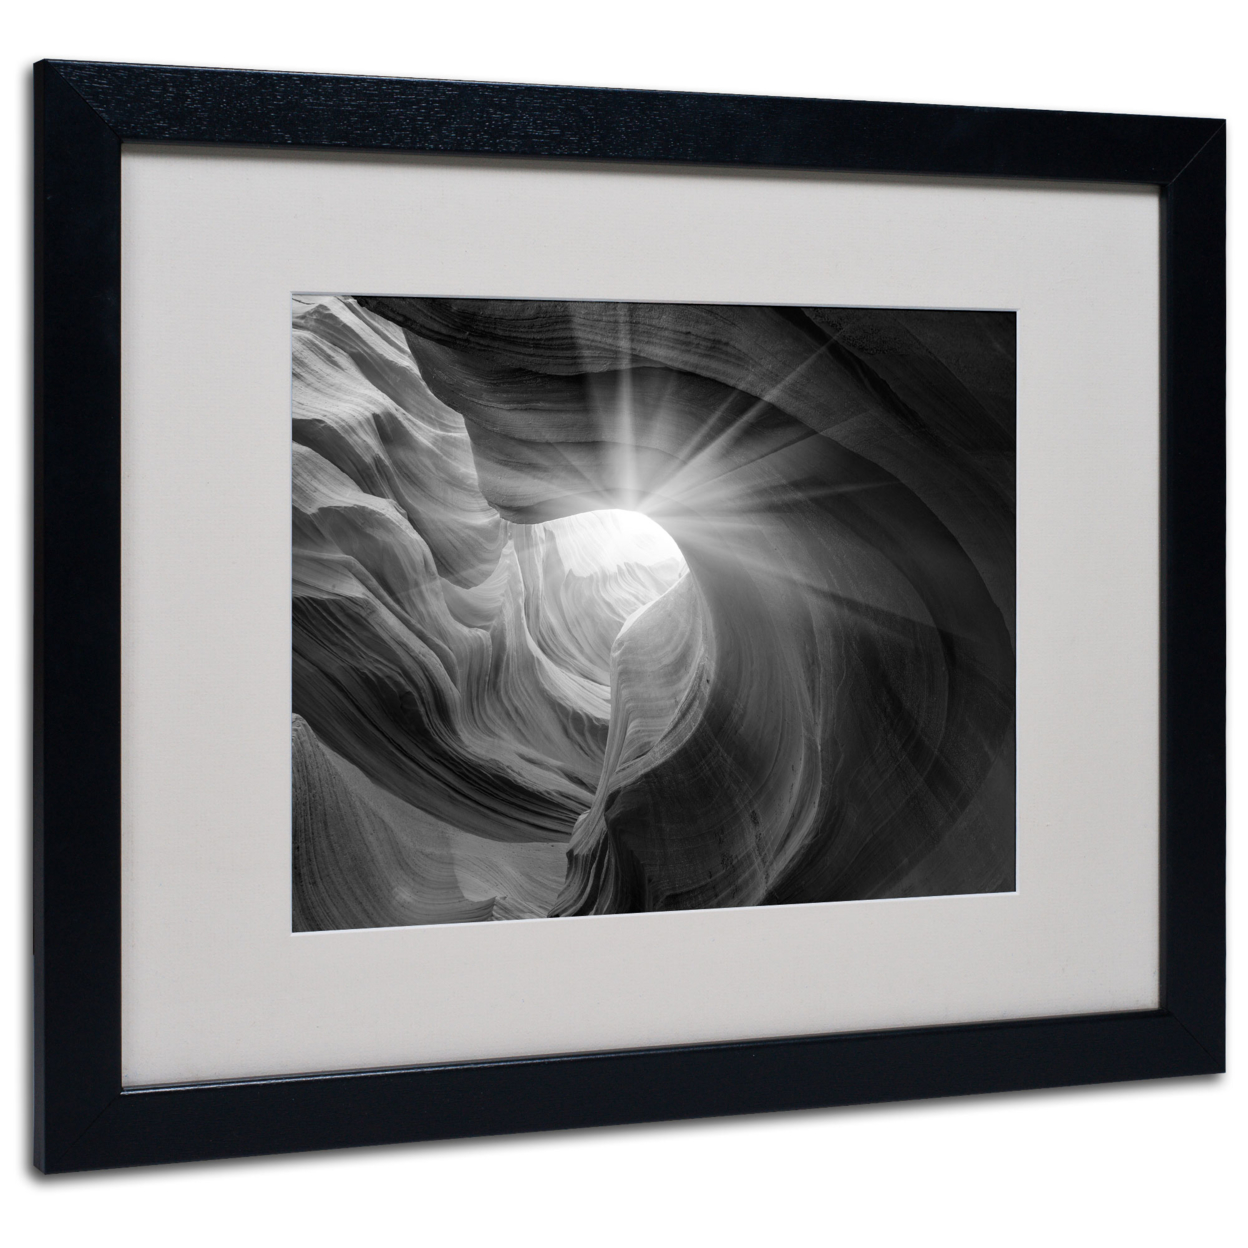 Moises Levy 'Searching Light I' Black Wooden Framed Art 18 X 22 Inches